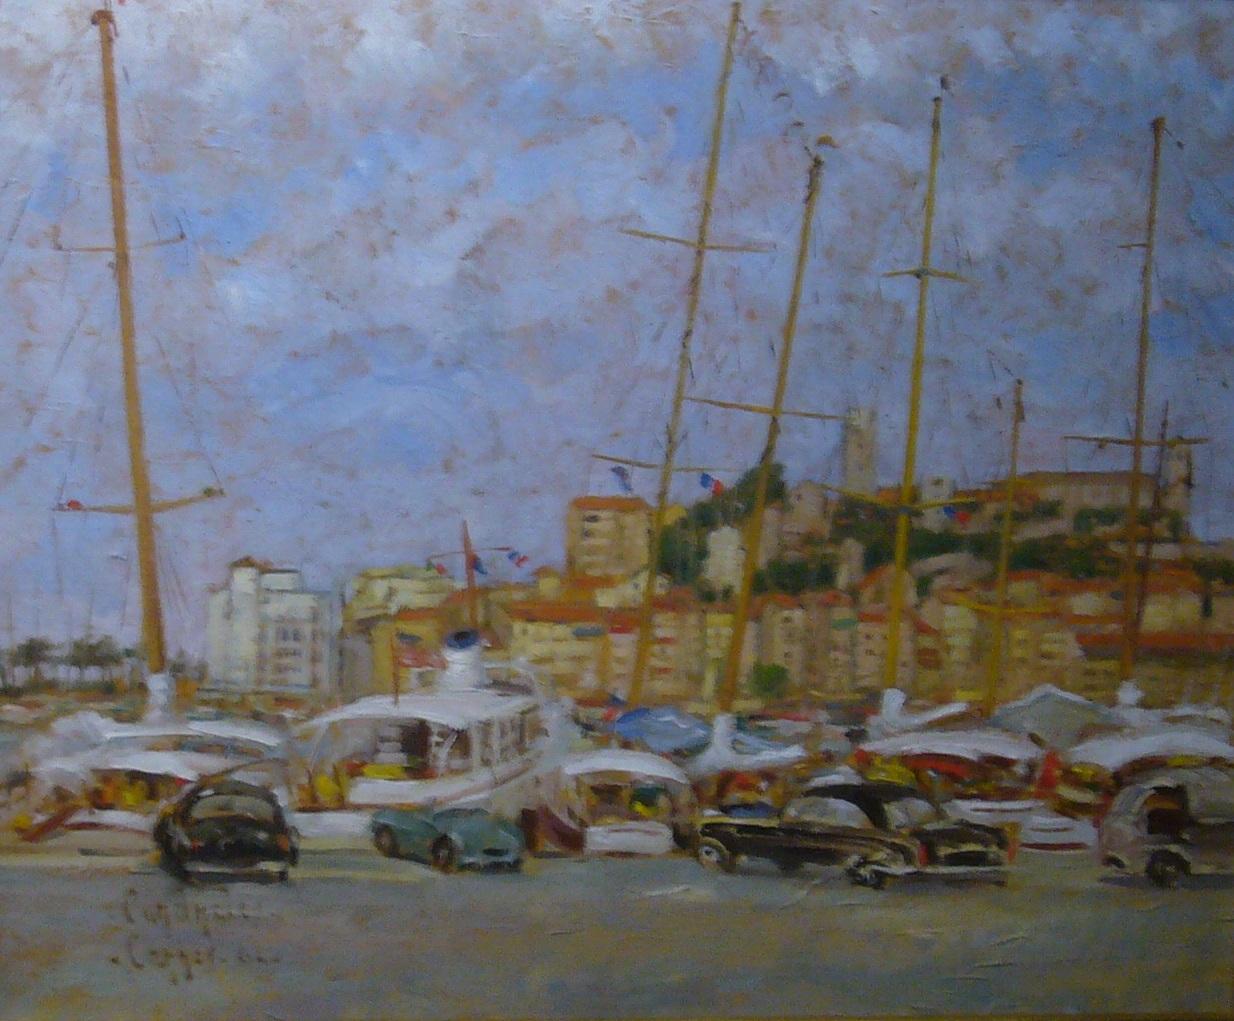 Candhales Figurative Painting - Cannes (South of France) - oil on canvas, 50x61 cm.